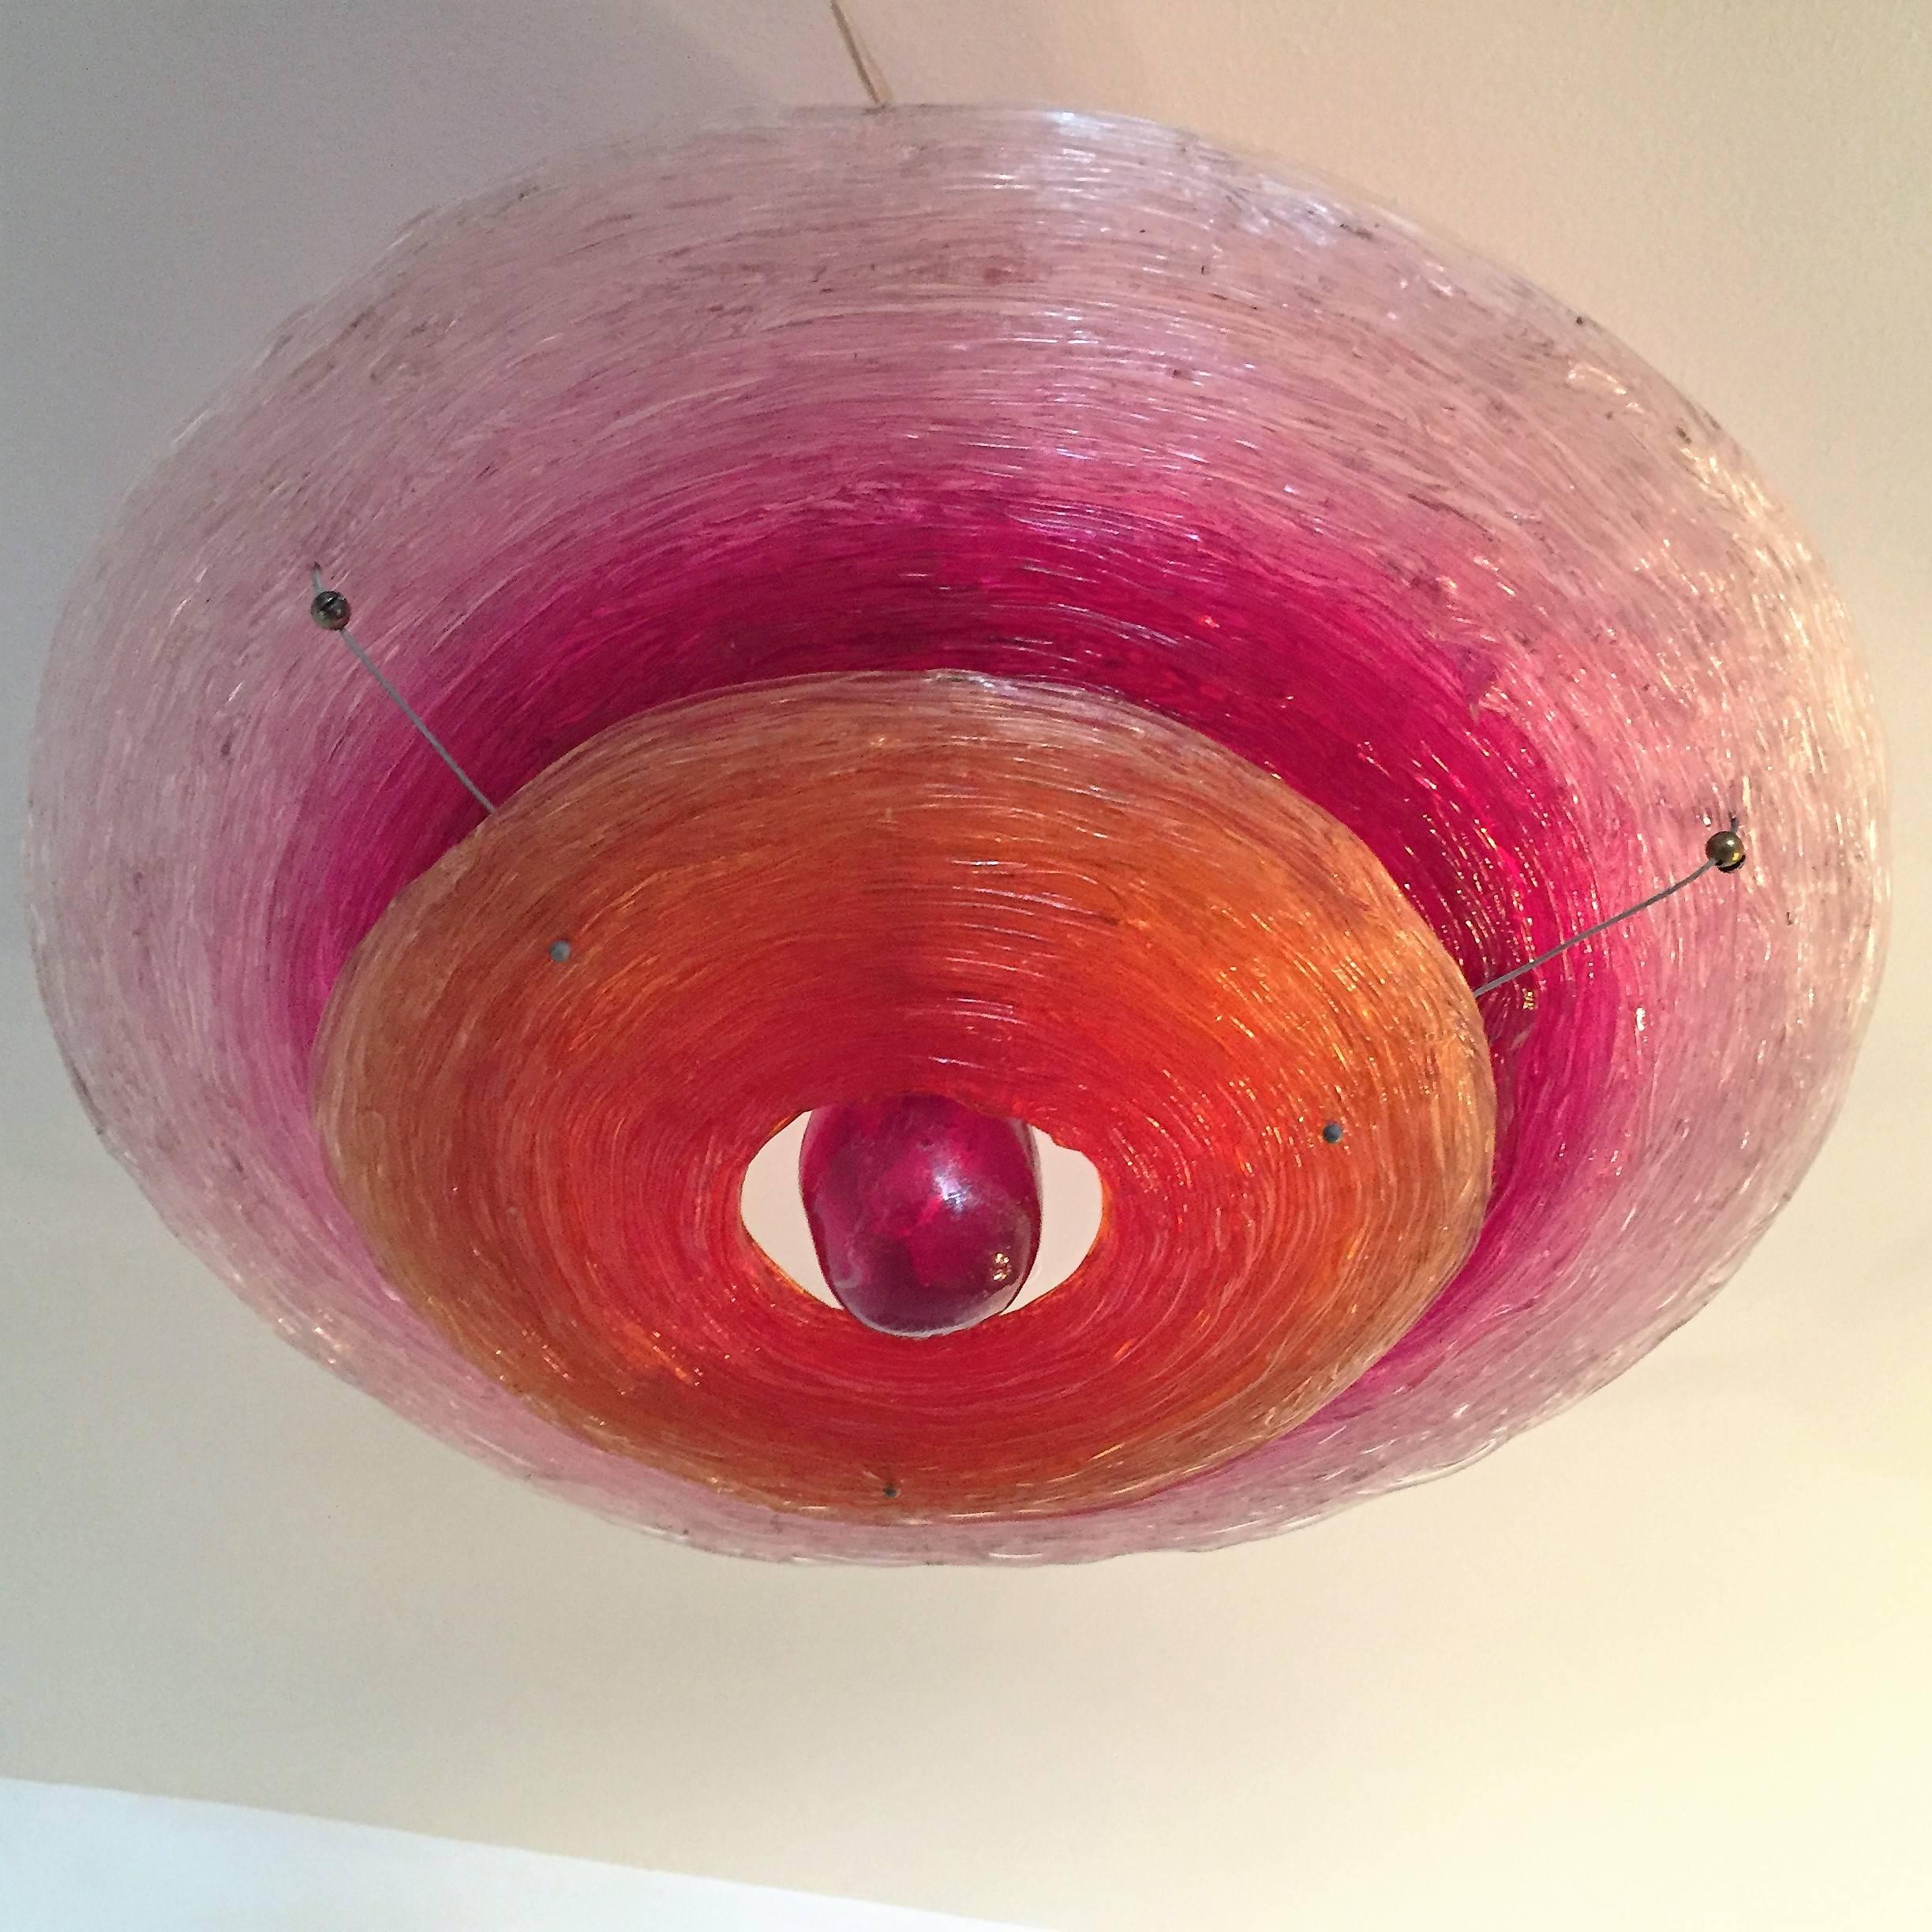 An wonderful original 1990s flush ceiling light sculpture composed of spun resin in majenta, orange and clear by the famed Italian artist, Jacobo Foggini. Five-light sources. Newly rewired.

Biography:
Jacopo Foggini discovered the potential of